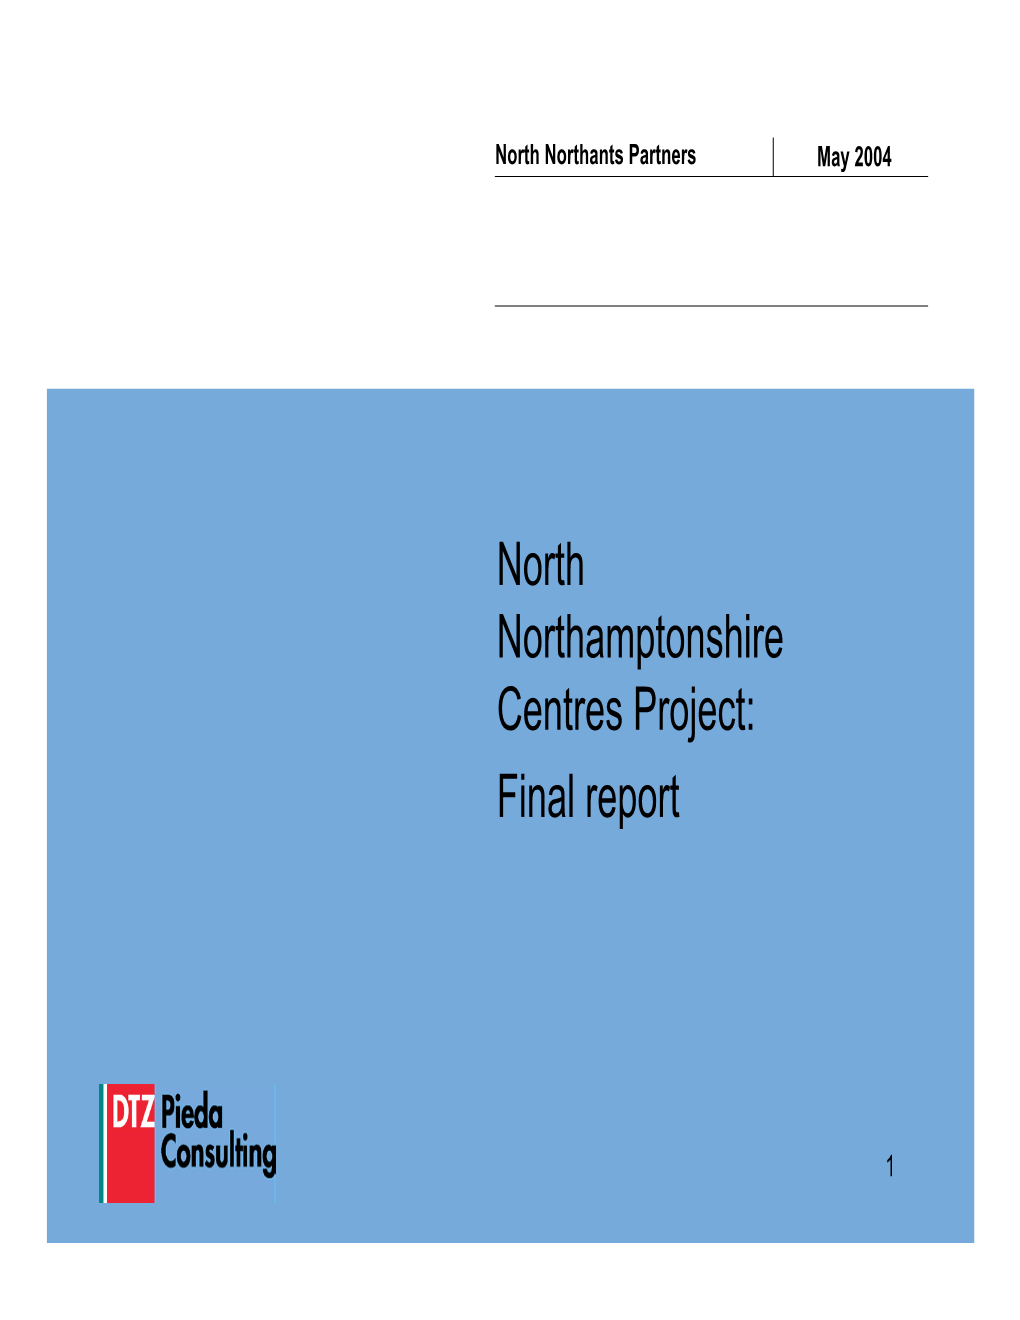 North Northamptonshire Centres Project: Final Report